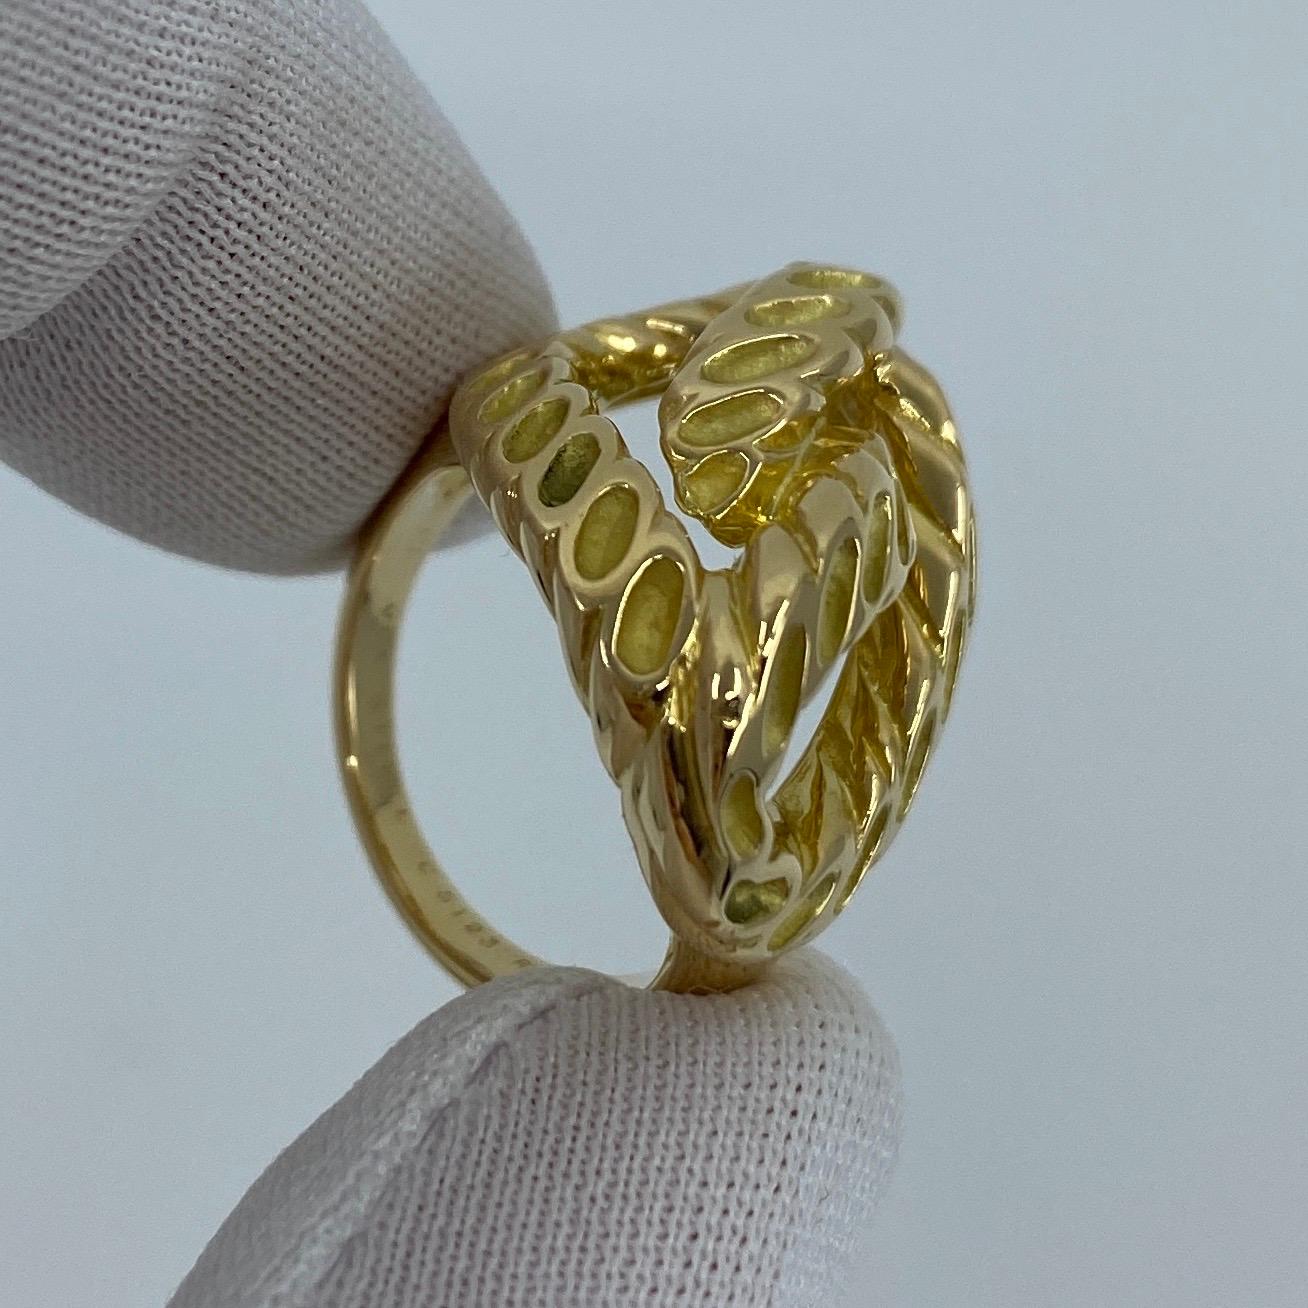 Rare Vintage Van Cleef & Arpels 18k Yellow Gold Braid Rope Motif Ring with Box In Excellent Condition For Sale In Birmingham, GB